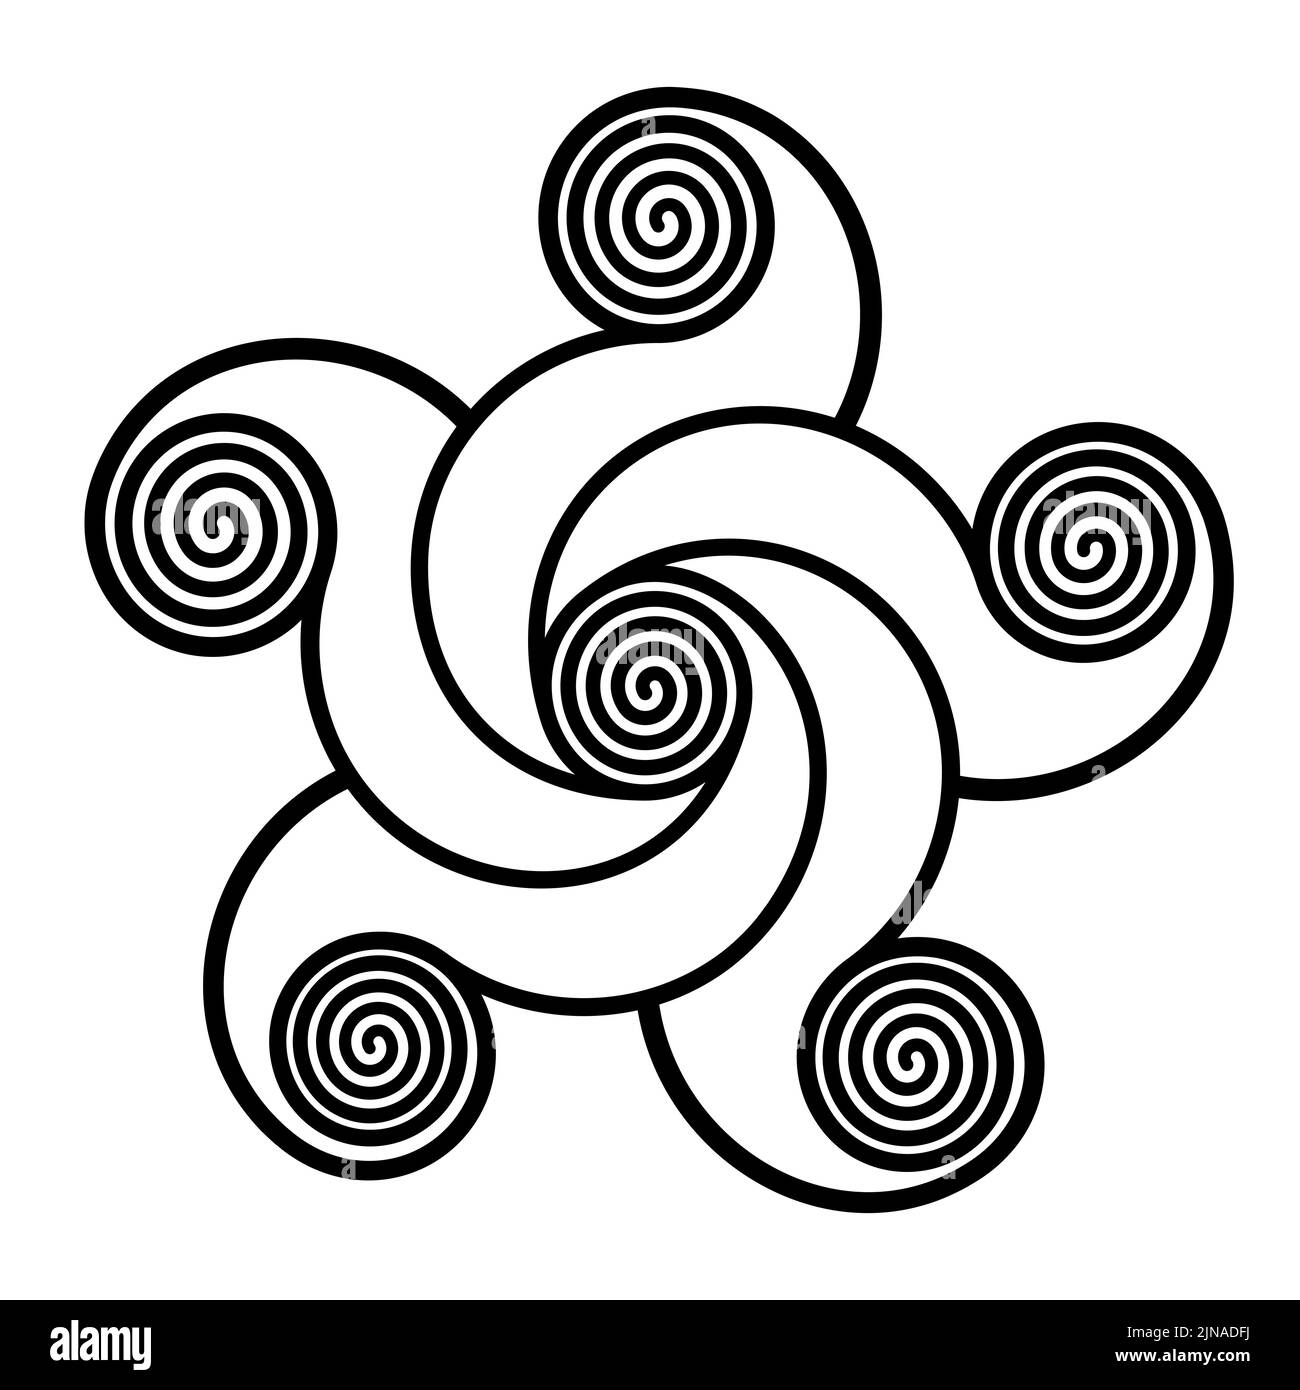 Spirals forming a pentagram shaped star. Five-pointed star, made of spirals, connected with curved lines to a spiral in the center. Stock Photo